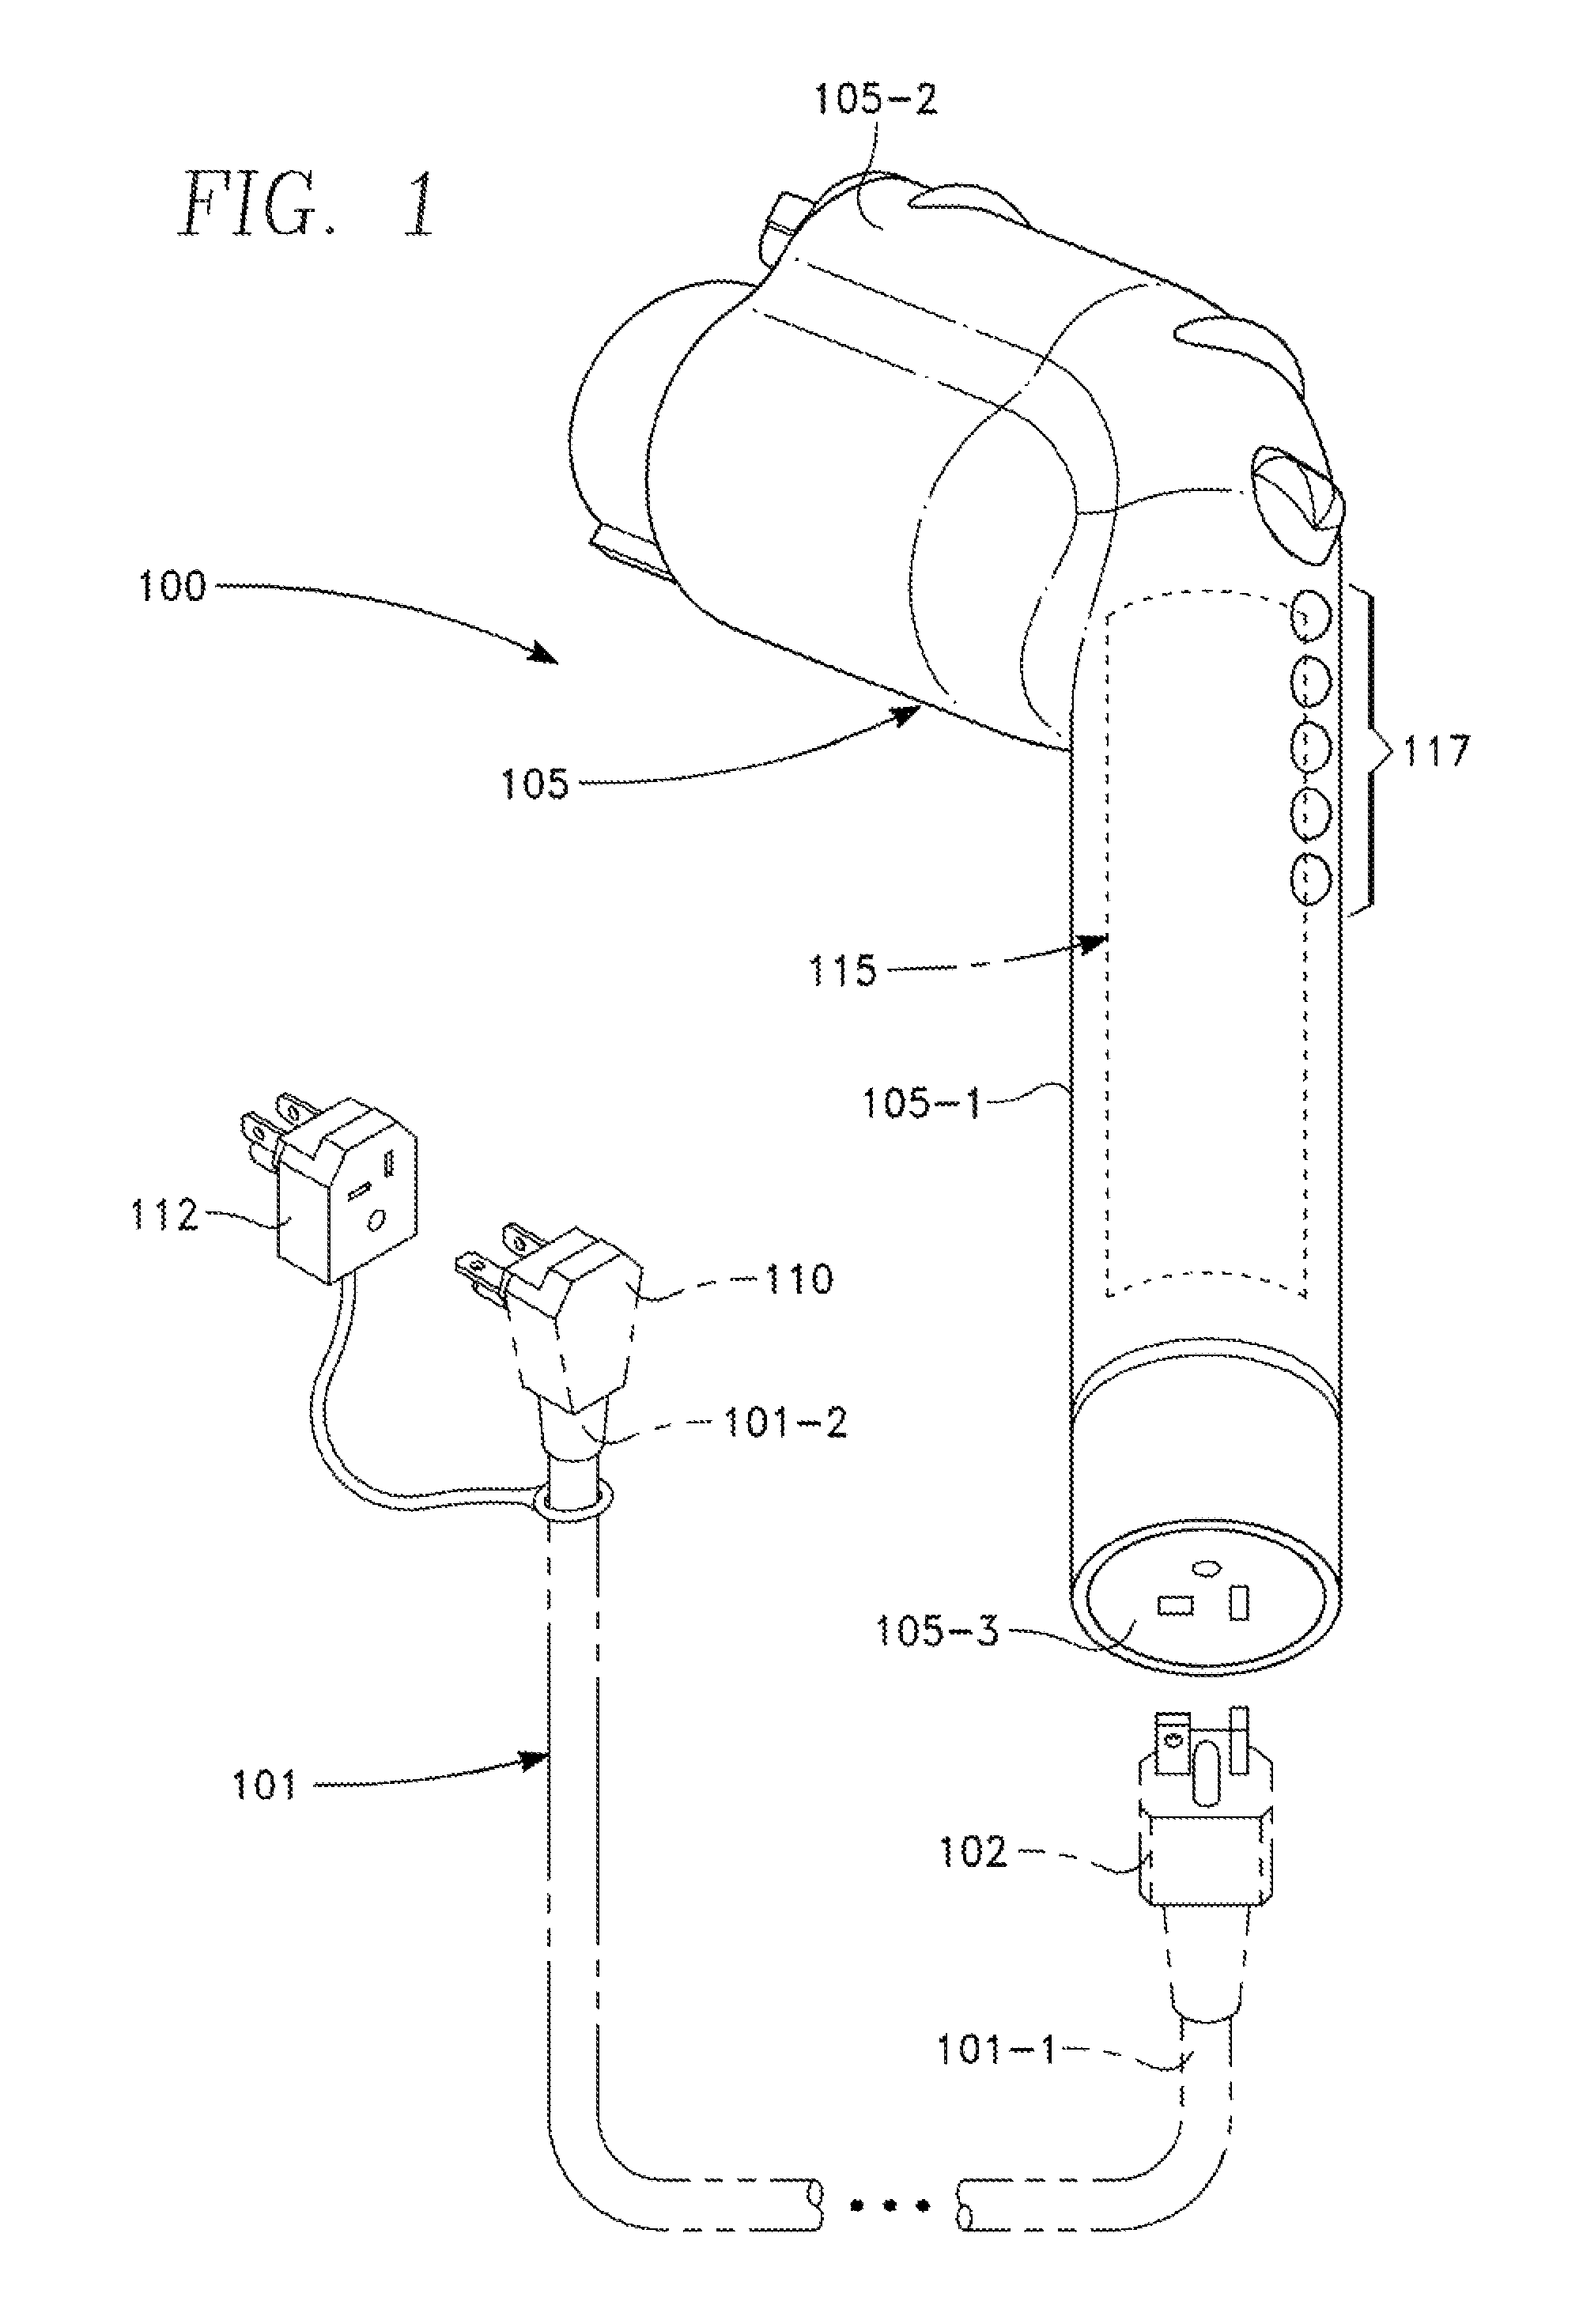 Electric vehicle docking connector with embedded EVSE controller